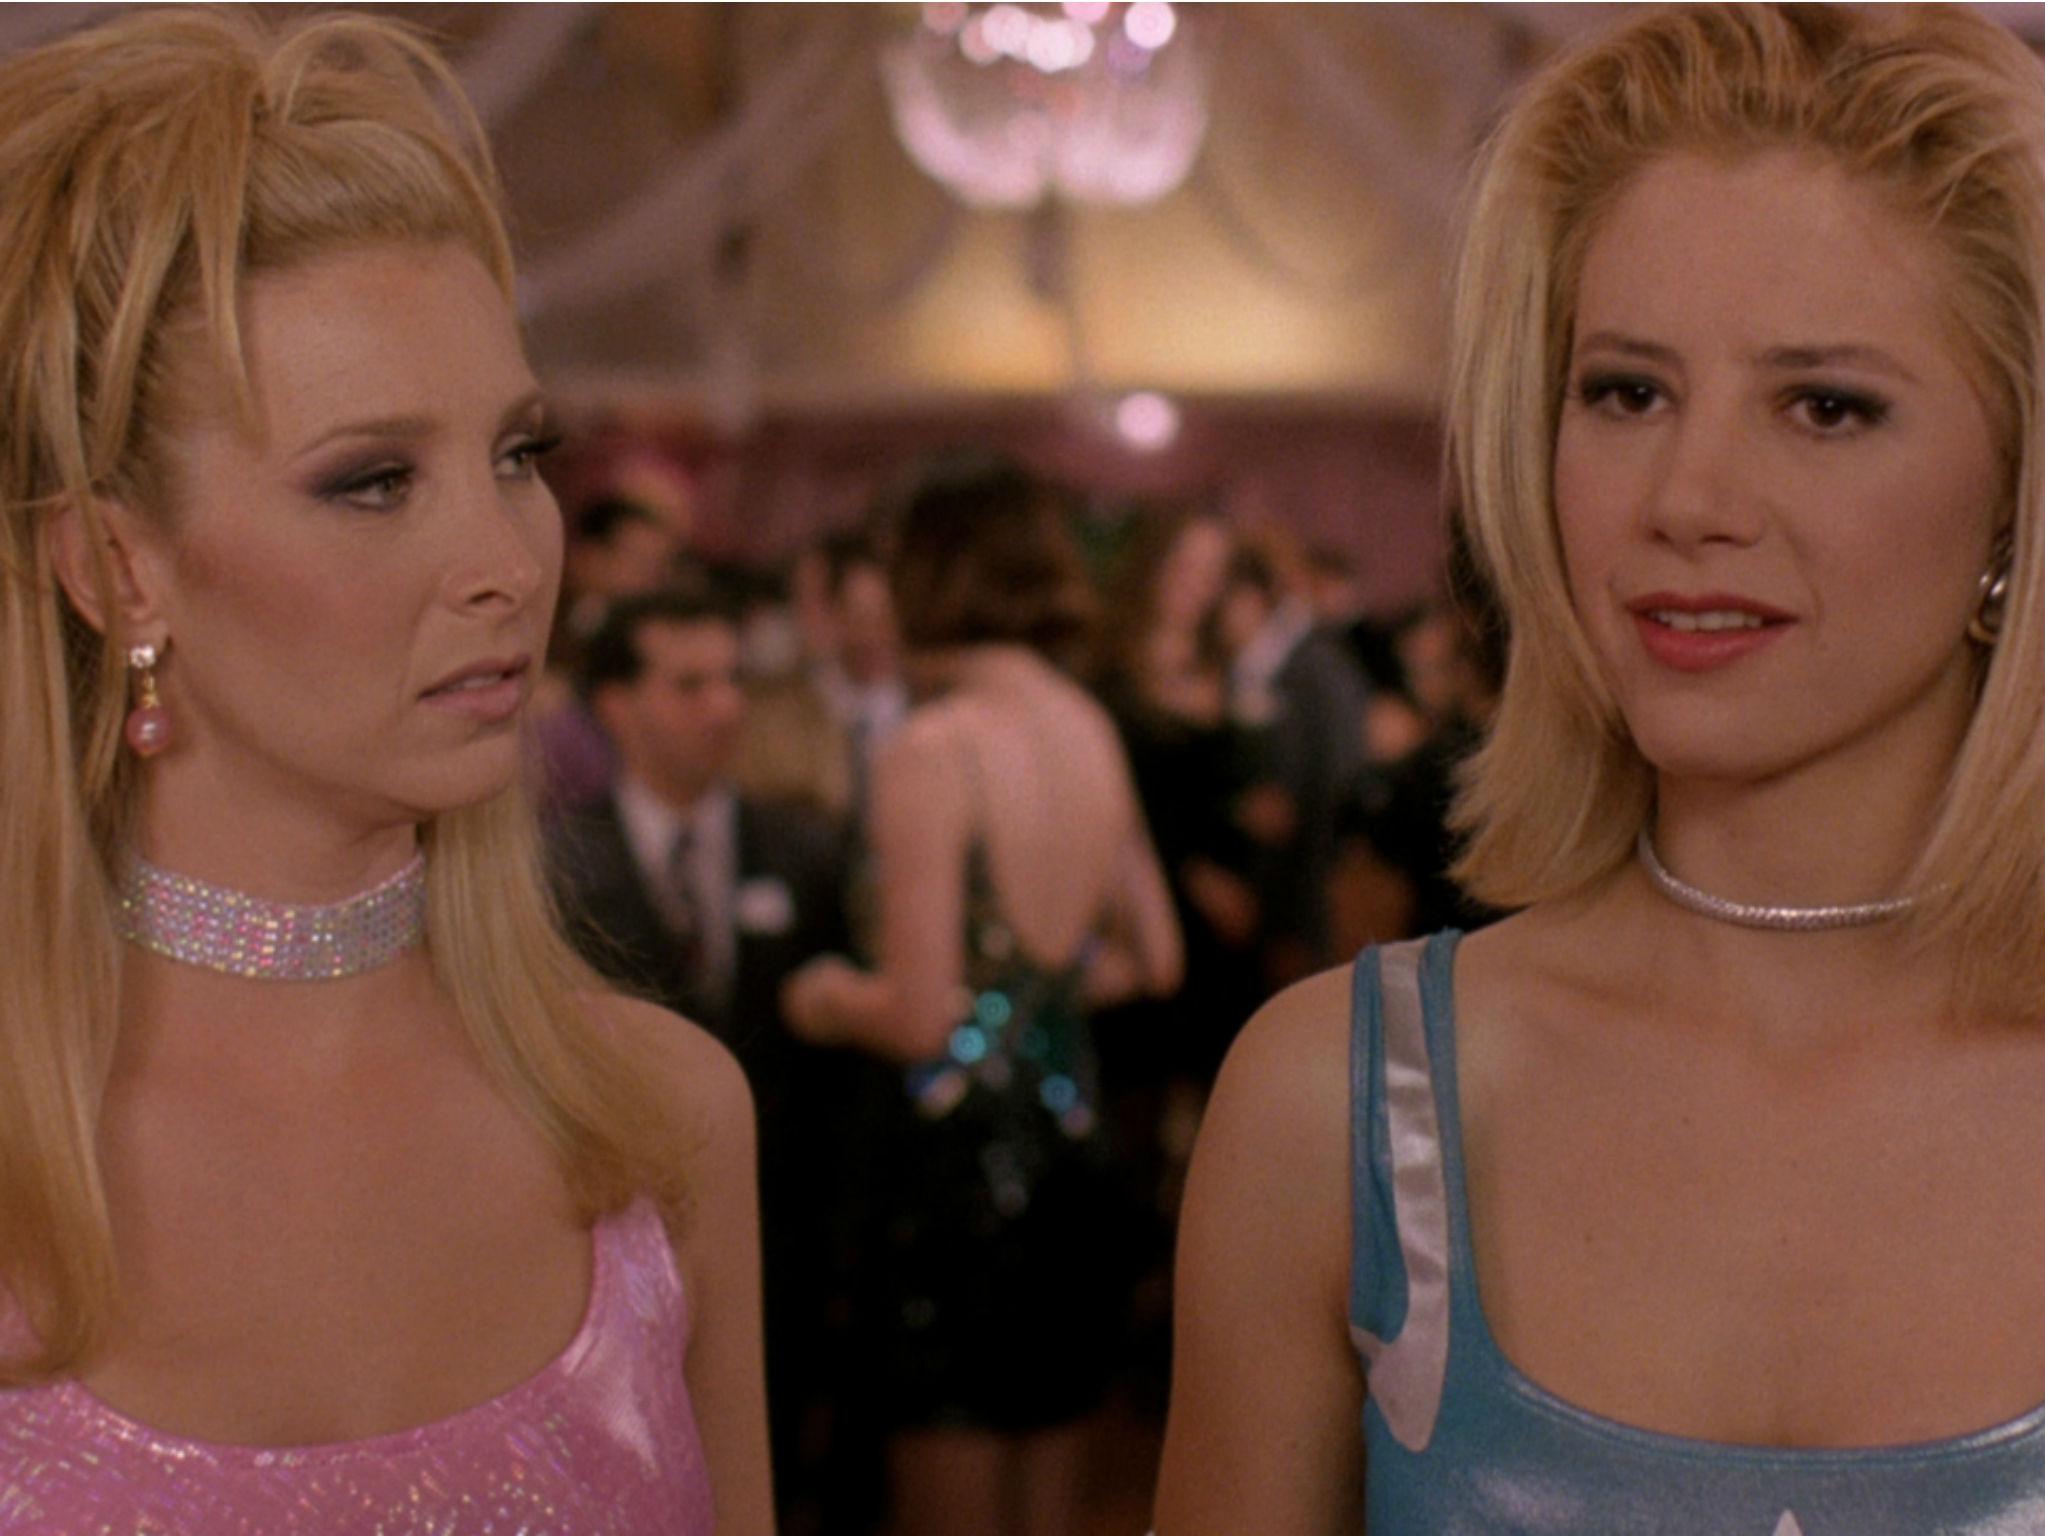 Lisa Kudrow (left) and Mira Sorvino (right) star in 'Romy and Michele's High School Reunion' (1997)